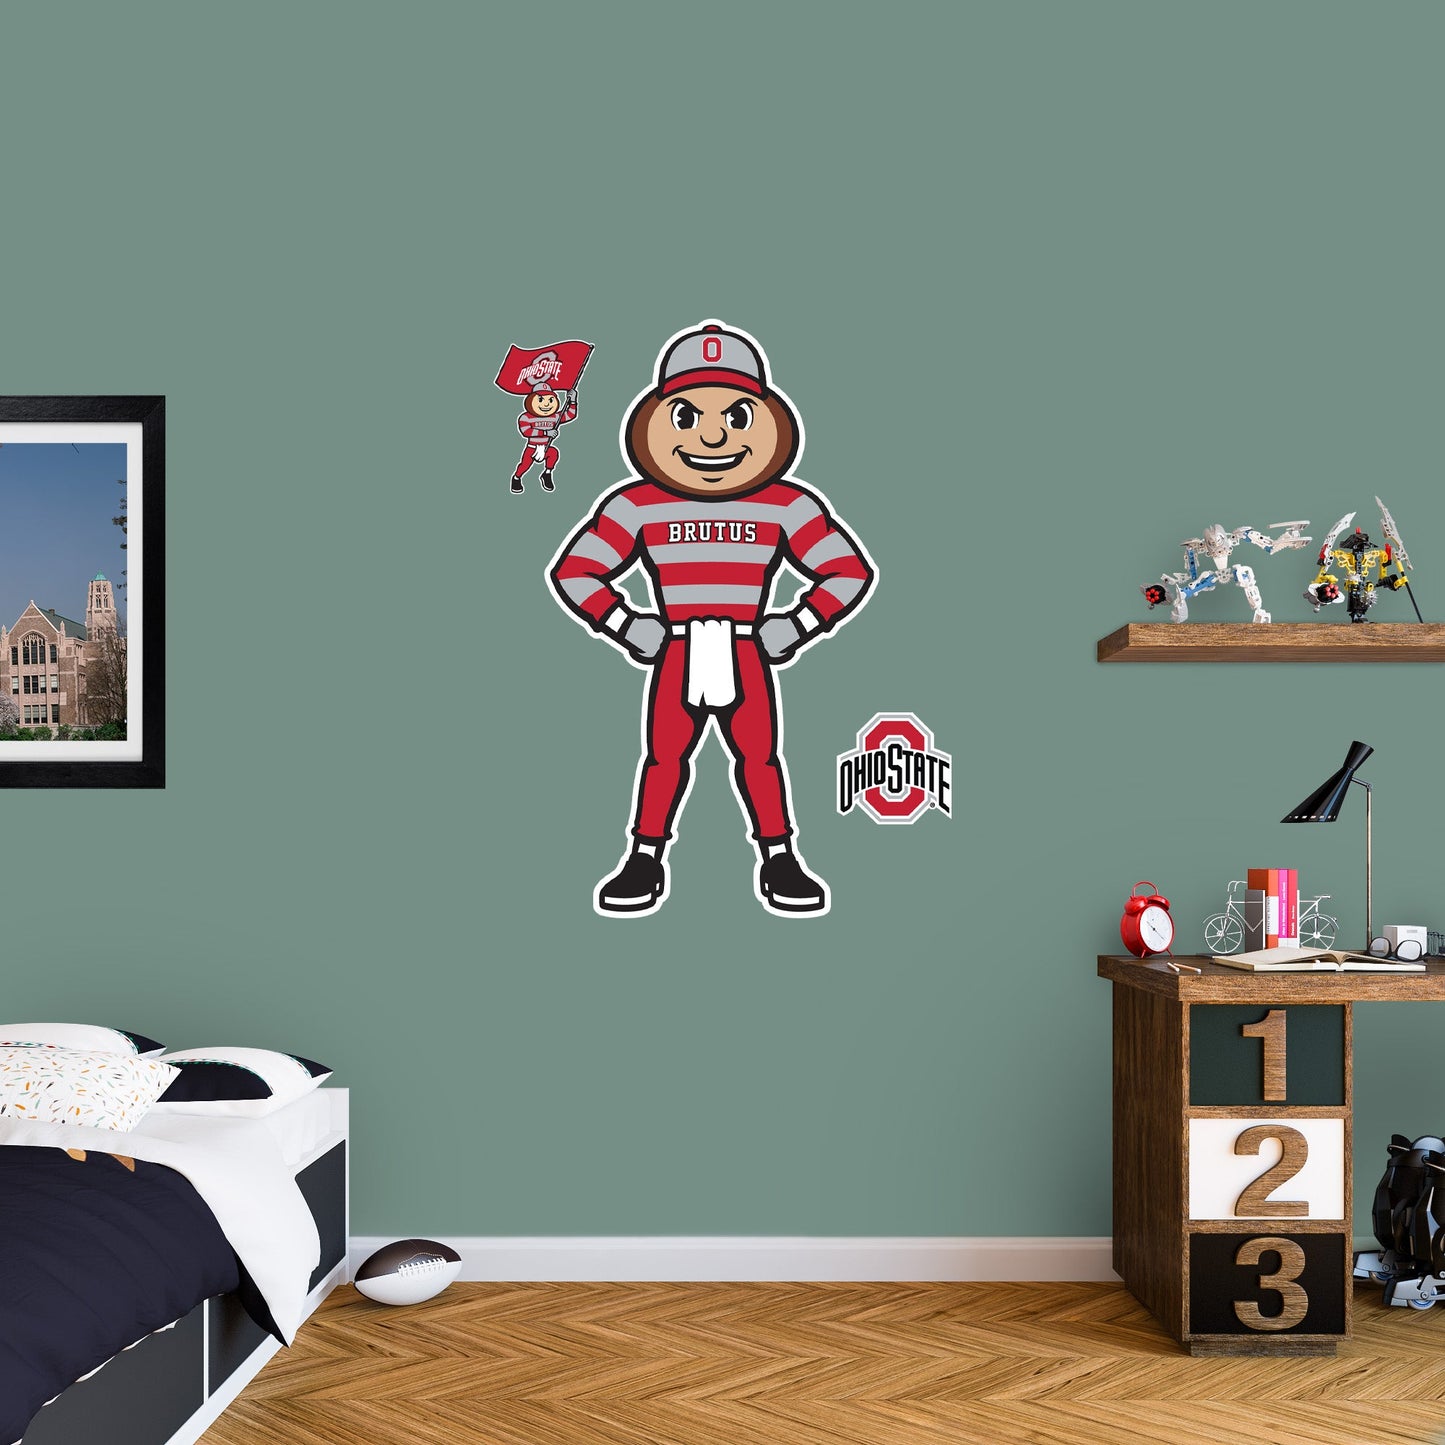 Ohio State U: Ohio State Buckeyes Brutus Buckeye Illustrated Mascot        - Officially Licensed NCAA Removable     Adhesive Decal